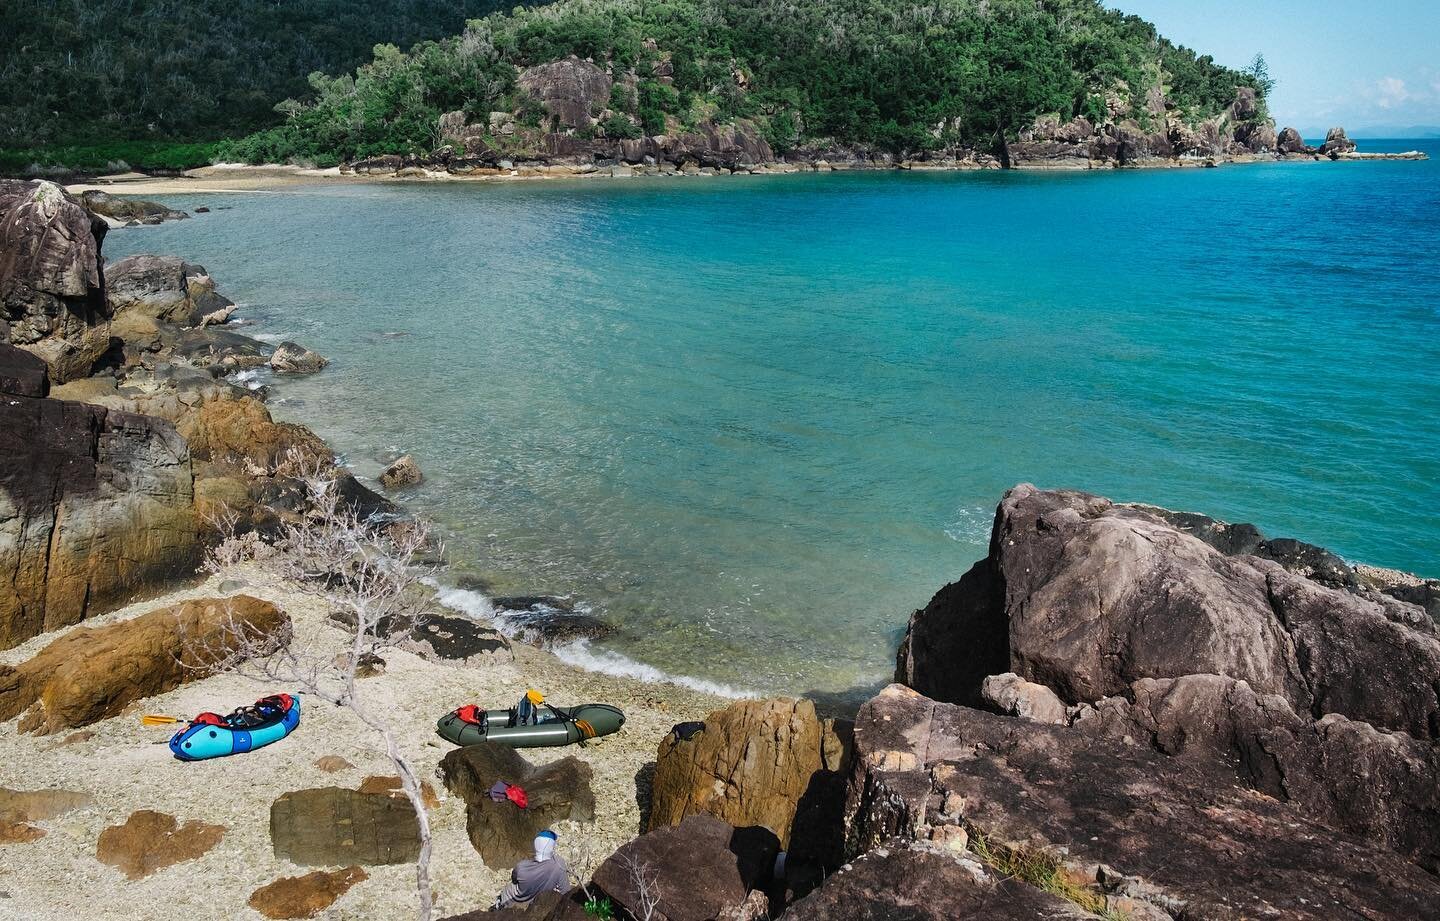 Nearshore coastal journey&rsquo;s in your packraft can be a fantastic way to explore some harder to reach spots. Checkout one such trip we completed along the beautiful coastline of Queenslands Whitsunday Islands National Park. Link in bio.

#thisisp